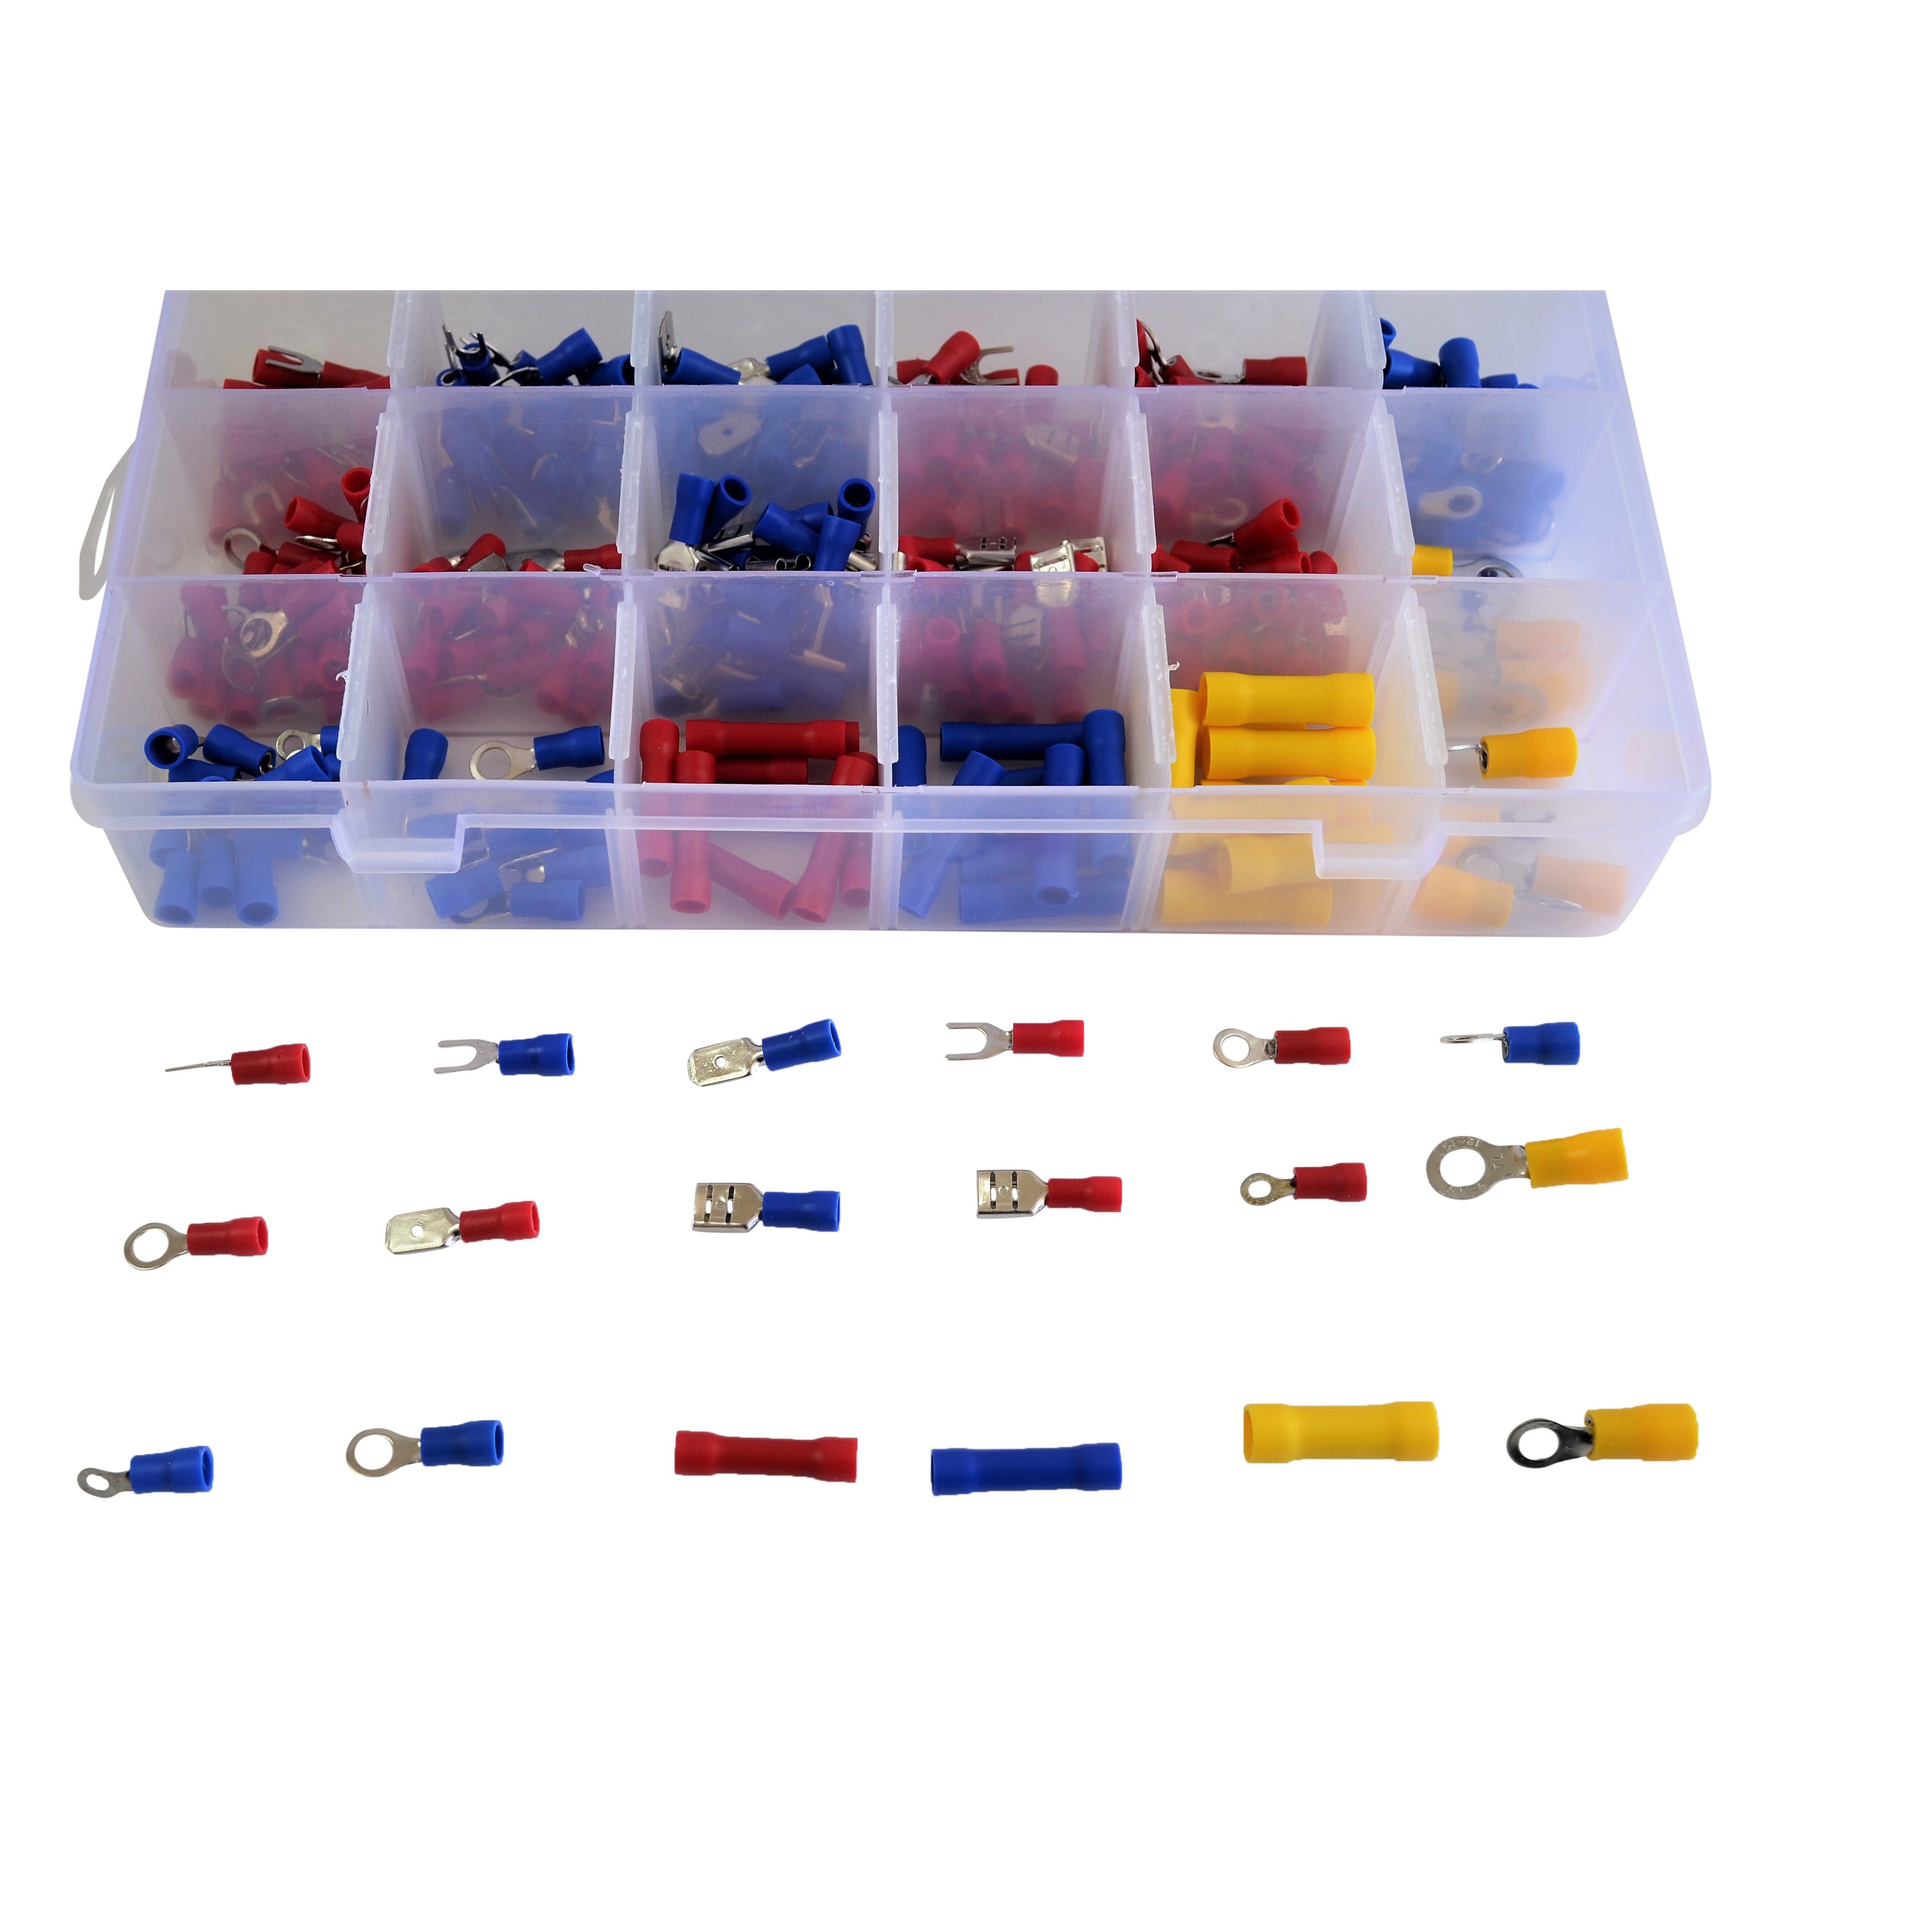 assorted insulated electrical wire crimp terminal kit 300 connectors 12/24v set vehicle parts accessories supplies 